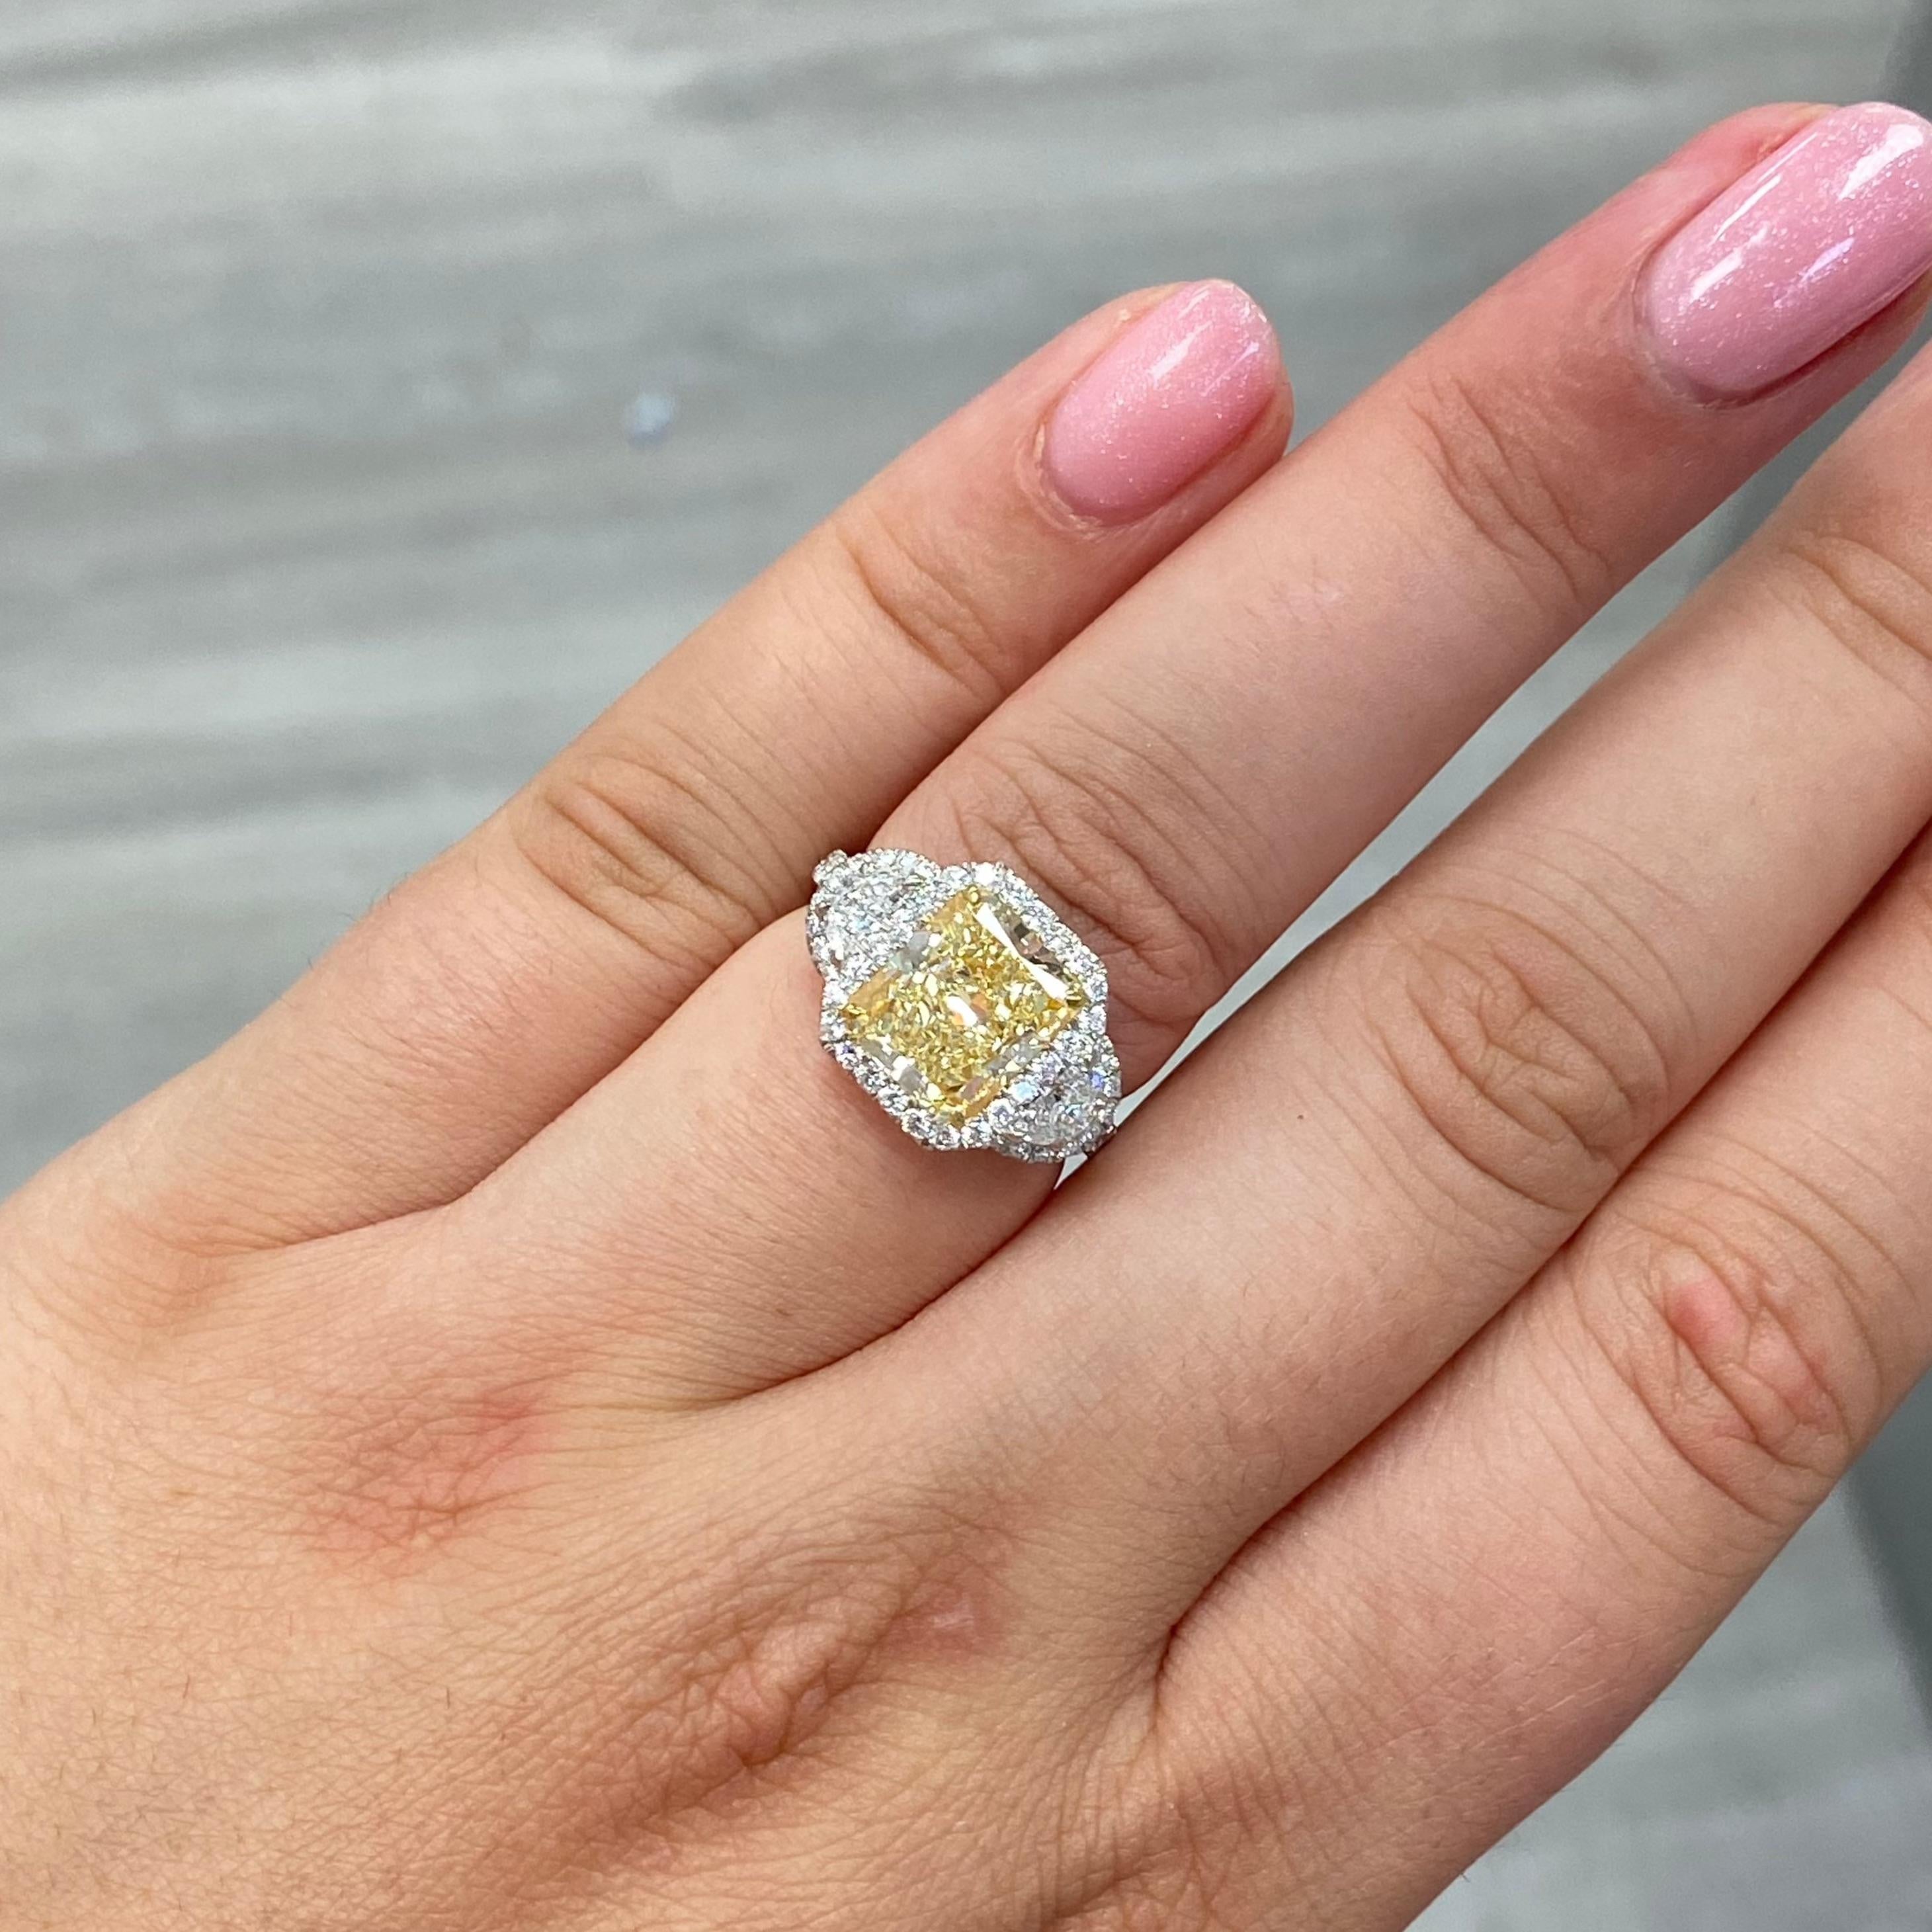 Radiant Cut 3.5 Carat GIA Yellow Elongated Radiant Diamond Ring For Sale